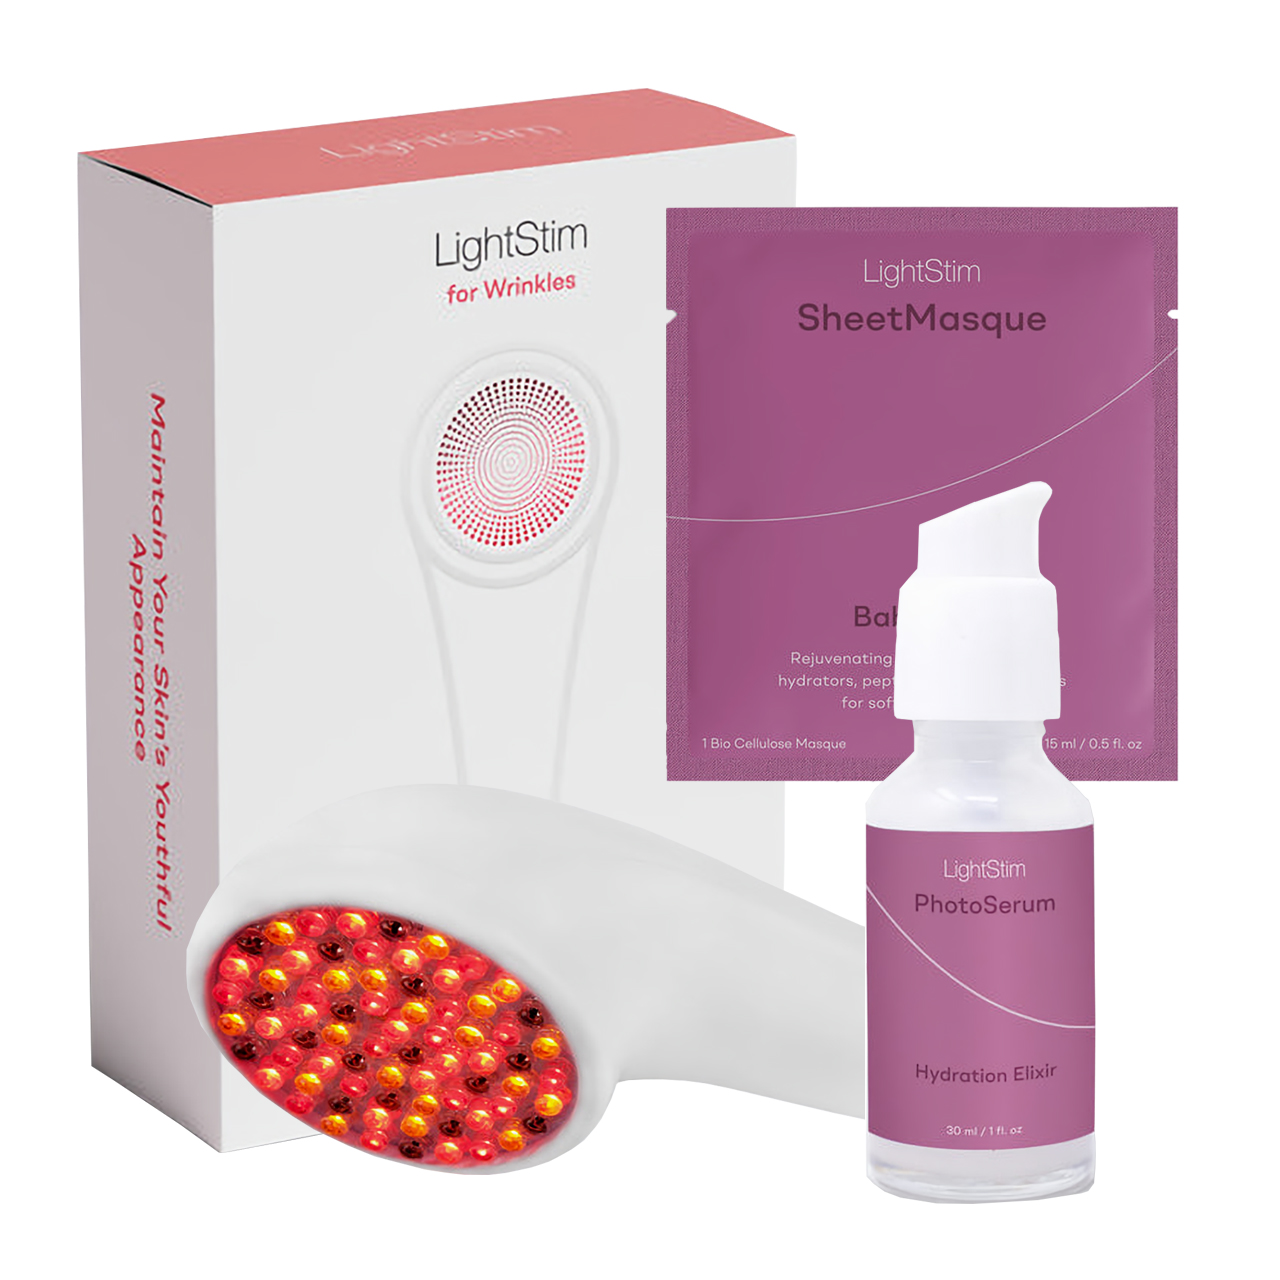 LightStim for Wrinkles (LS4W-PSPMB-PLUS) Questions & Answers